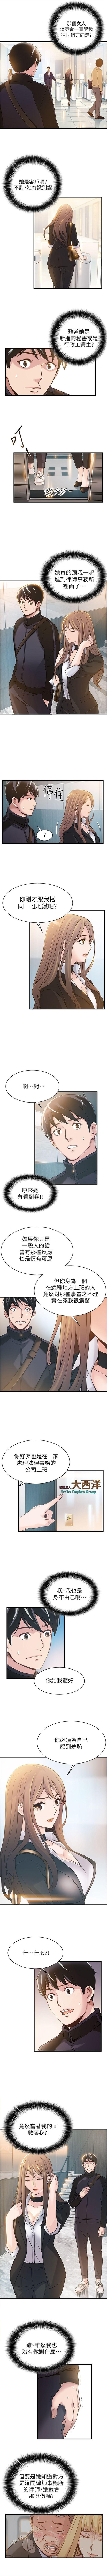 Spreading 弱點 1-101 官方中文（連載中） Action - Page 11